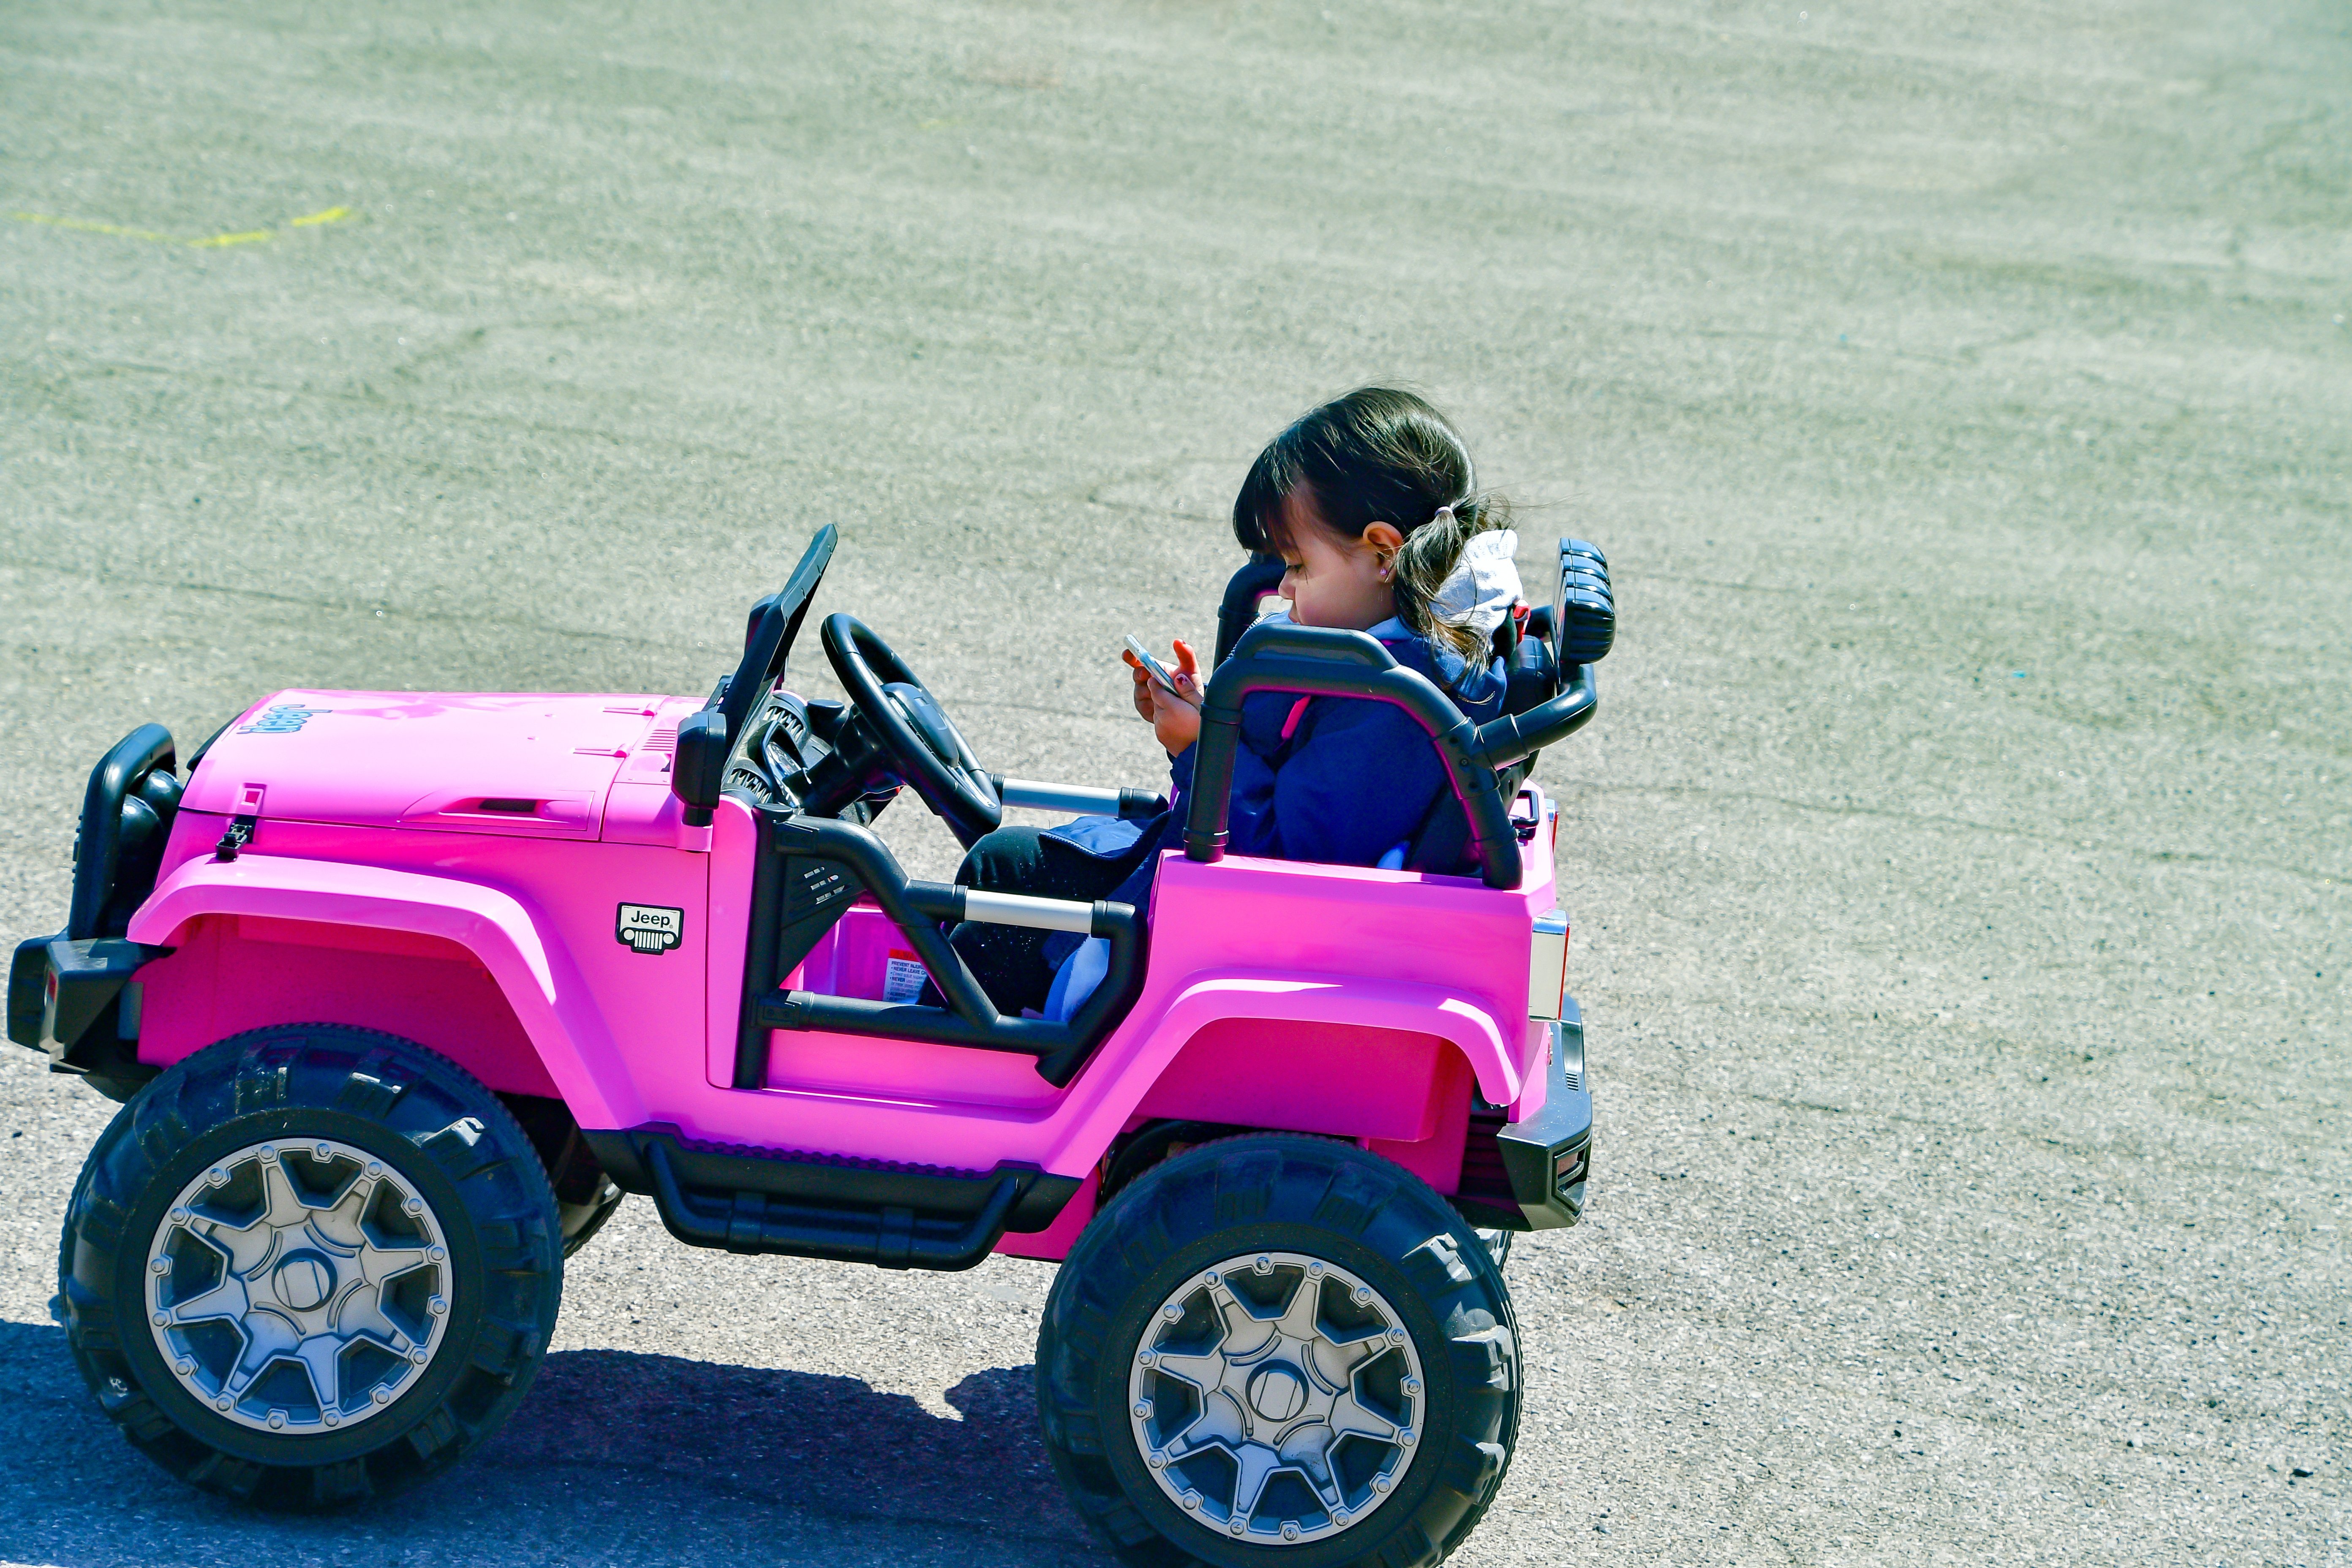 A little girl texting in her toy car. | Source: Shutterstock